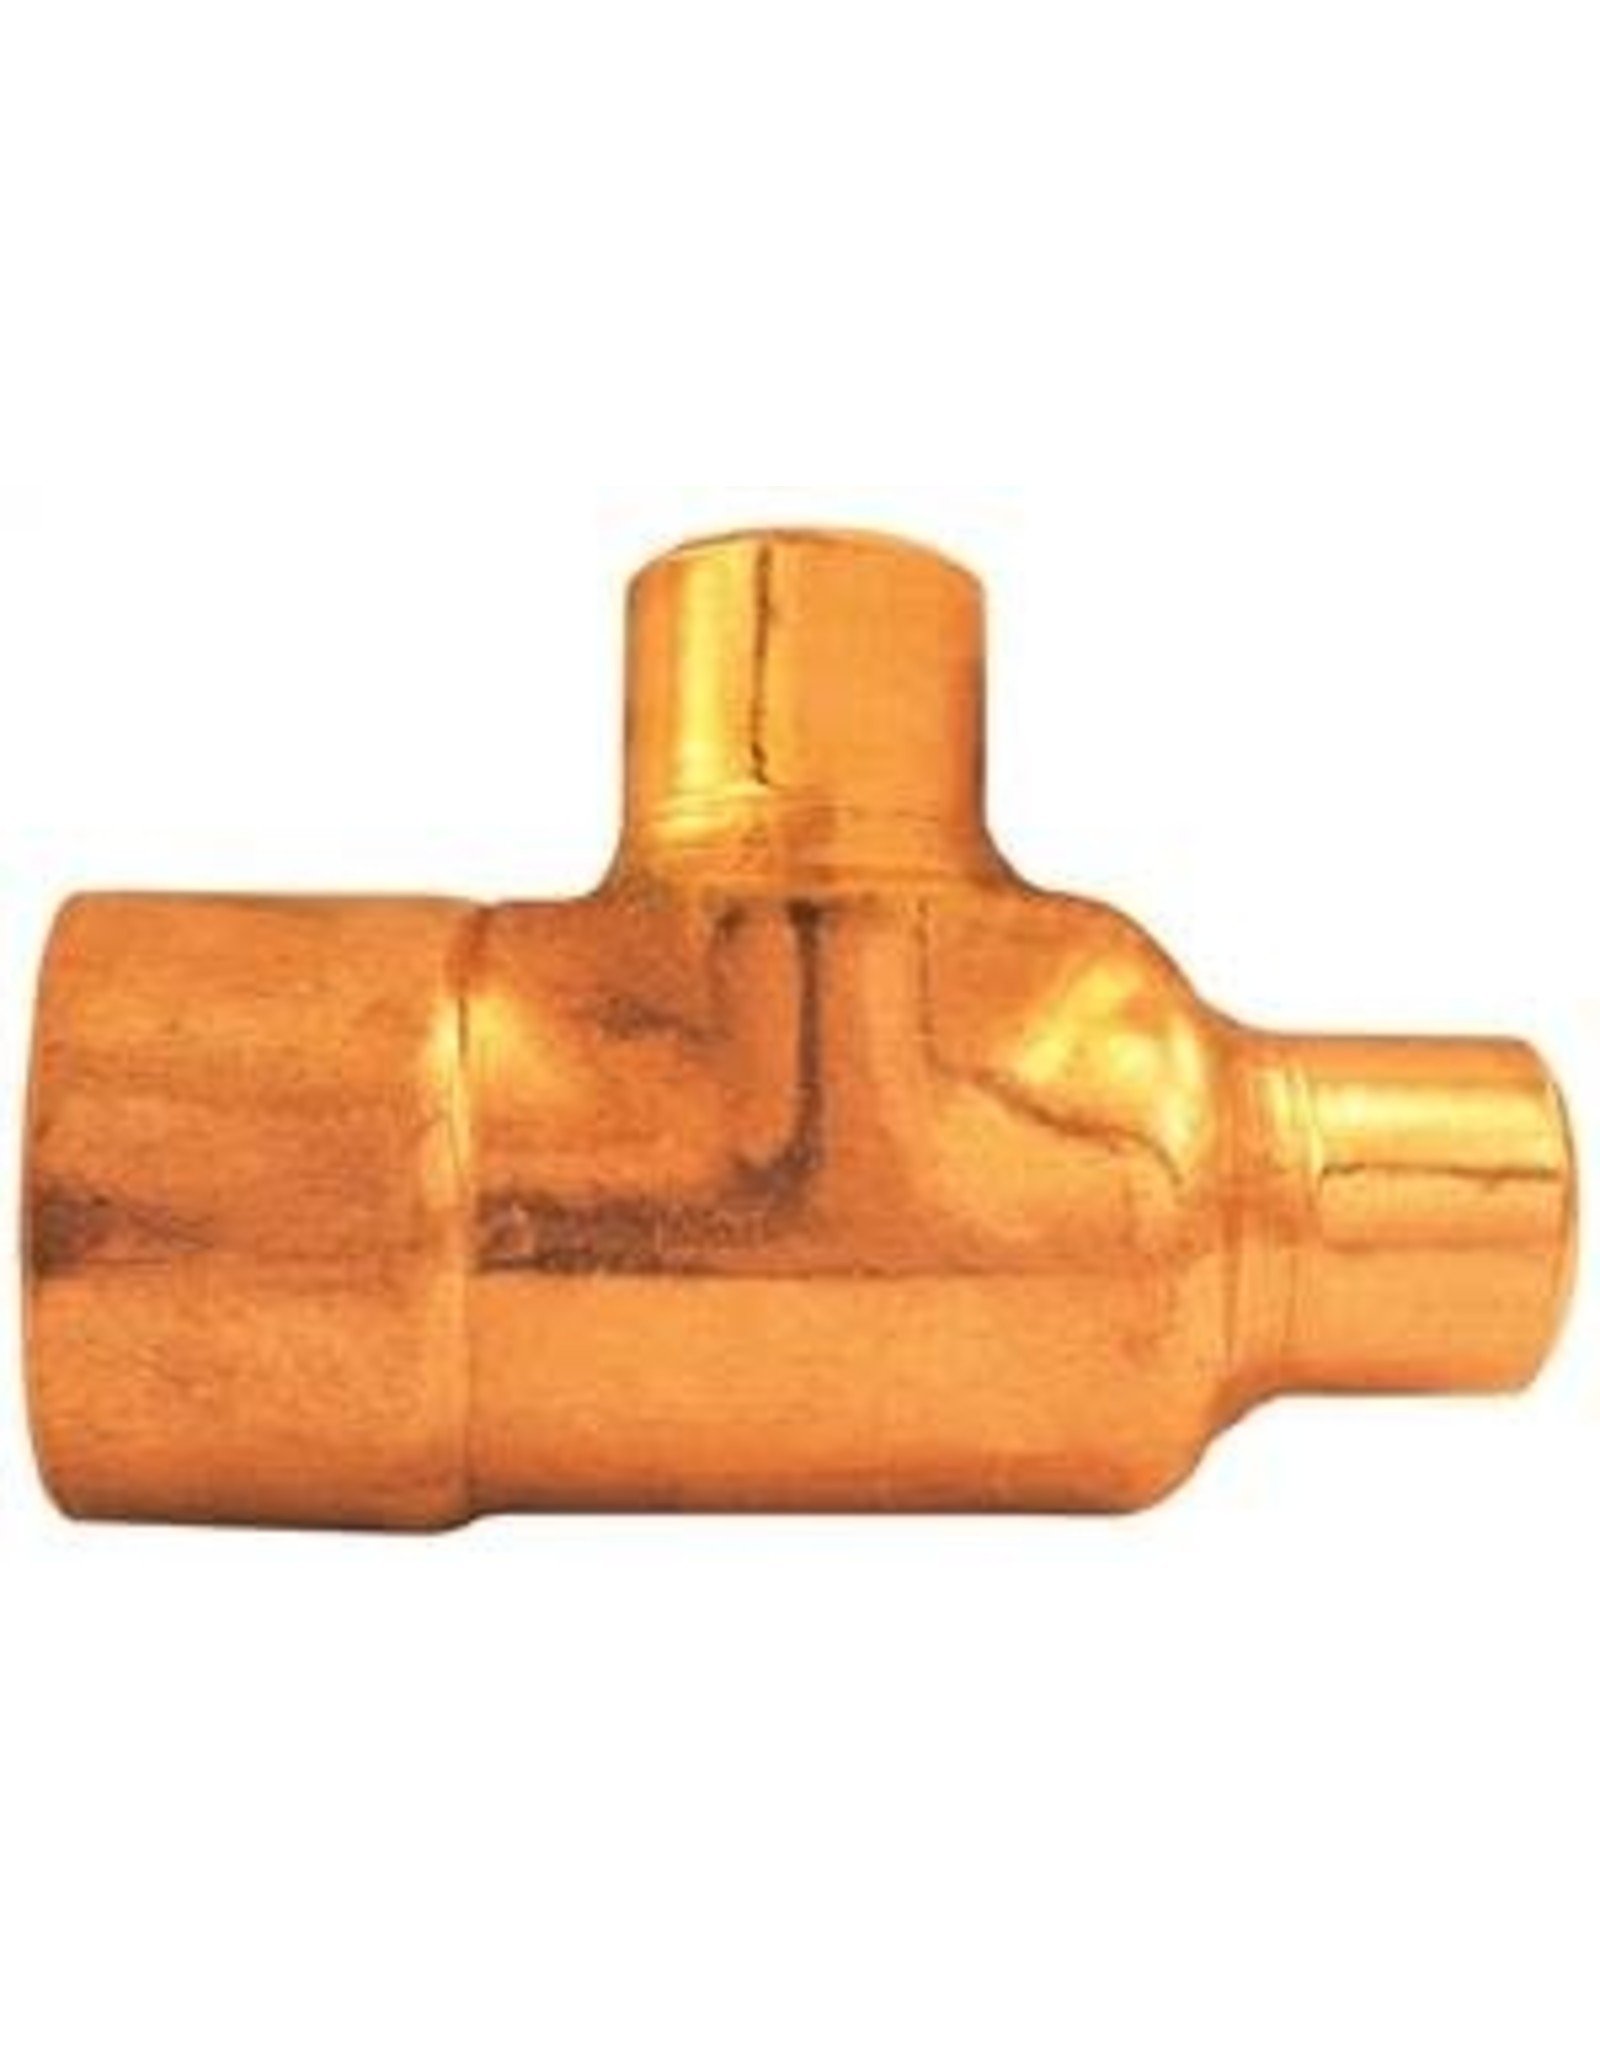 Elkhart EPC 111R Series 32794 Pipe Reducing Tee, 3/4 x 1/2 x 1/2 in, Sweat, Copper